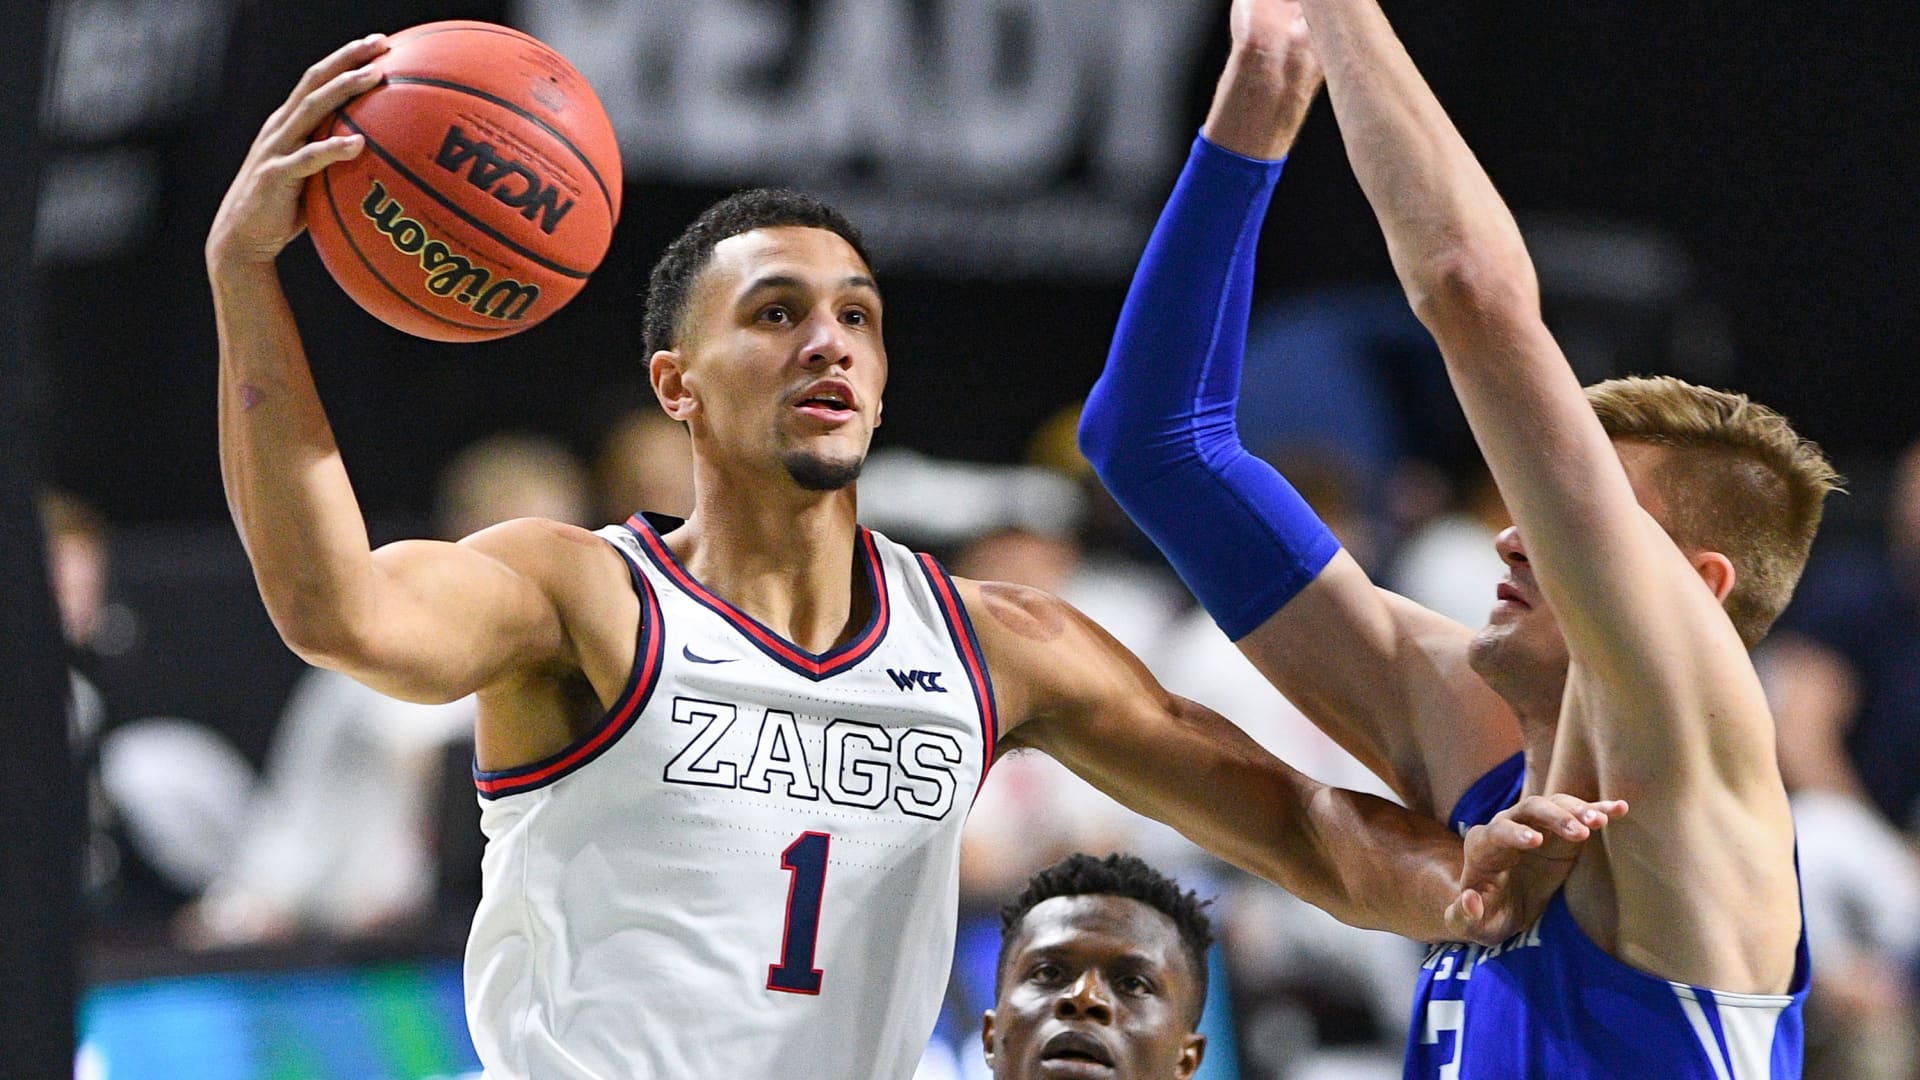 Gonzaga guard Jalen Suggs (1) drives to the basket against BYU forward Matt Haarms (3) during the championship game of the men's West Coast Conference basketball tournament between the BYU Cougars and the Gonzaga Bulldogs on March 9, 2021, at the Orleans Arena in Las Vegas, NV.